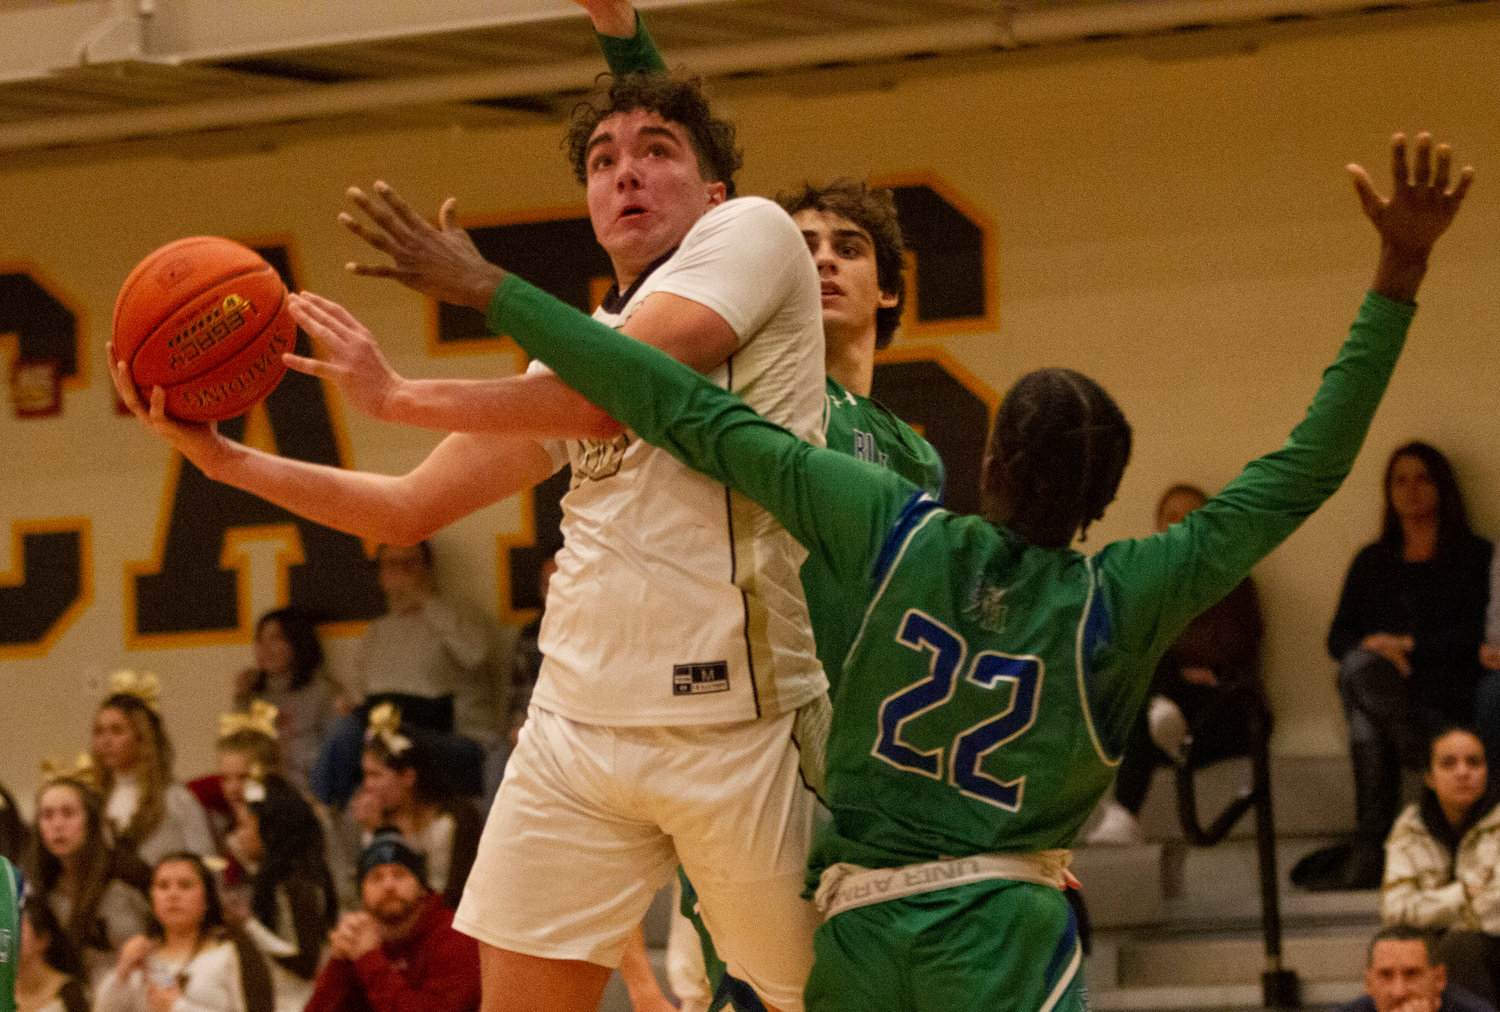 Max Morotti fights his way up to the basket in the second half.